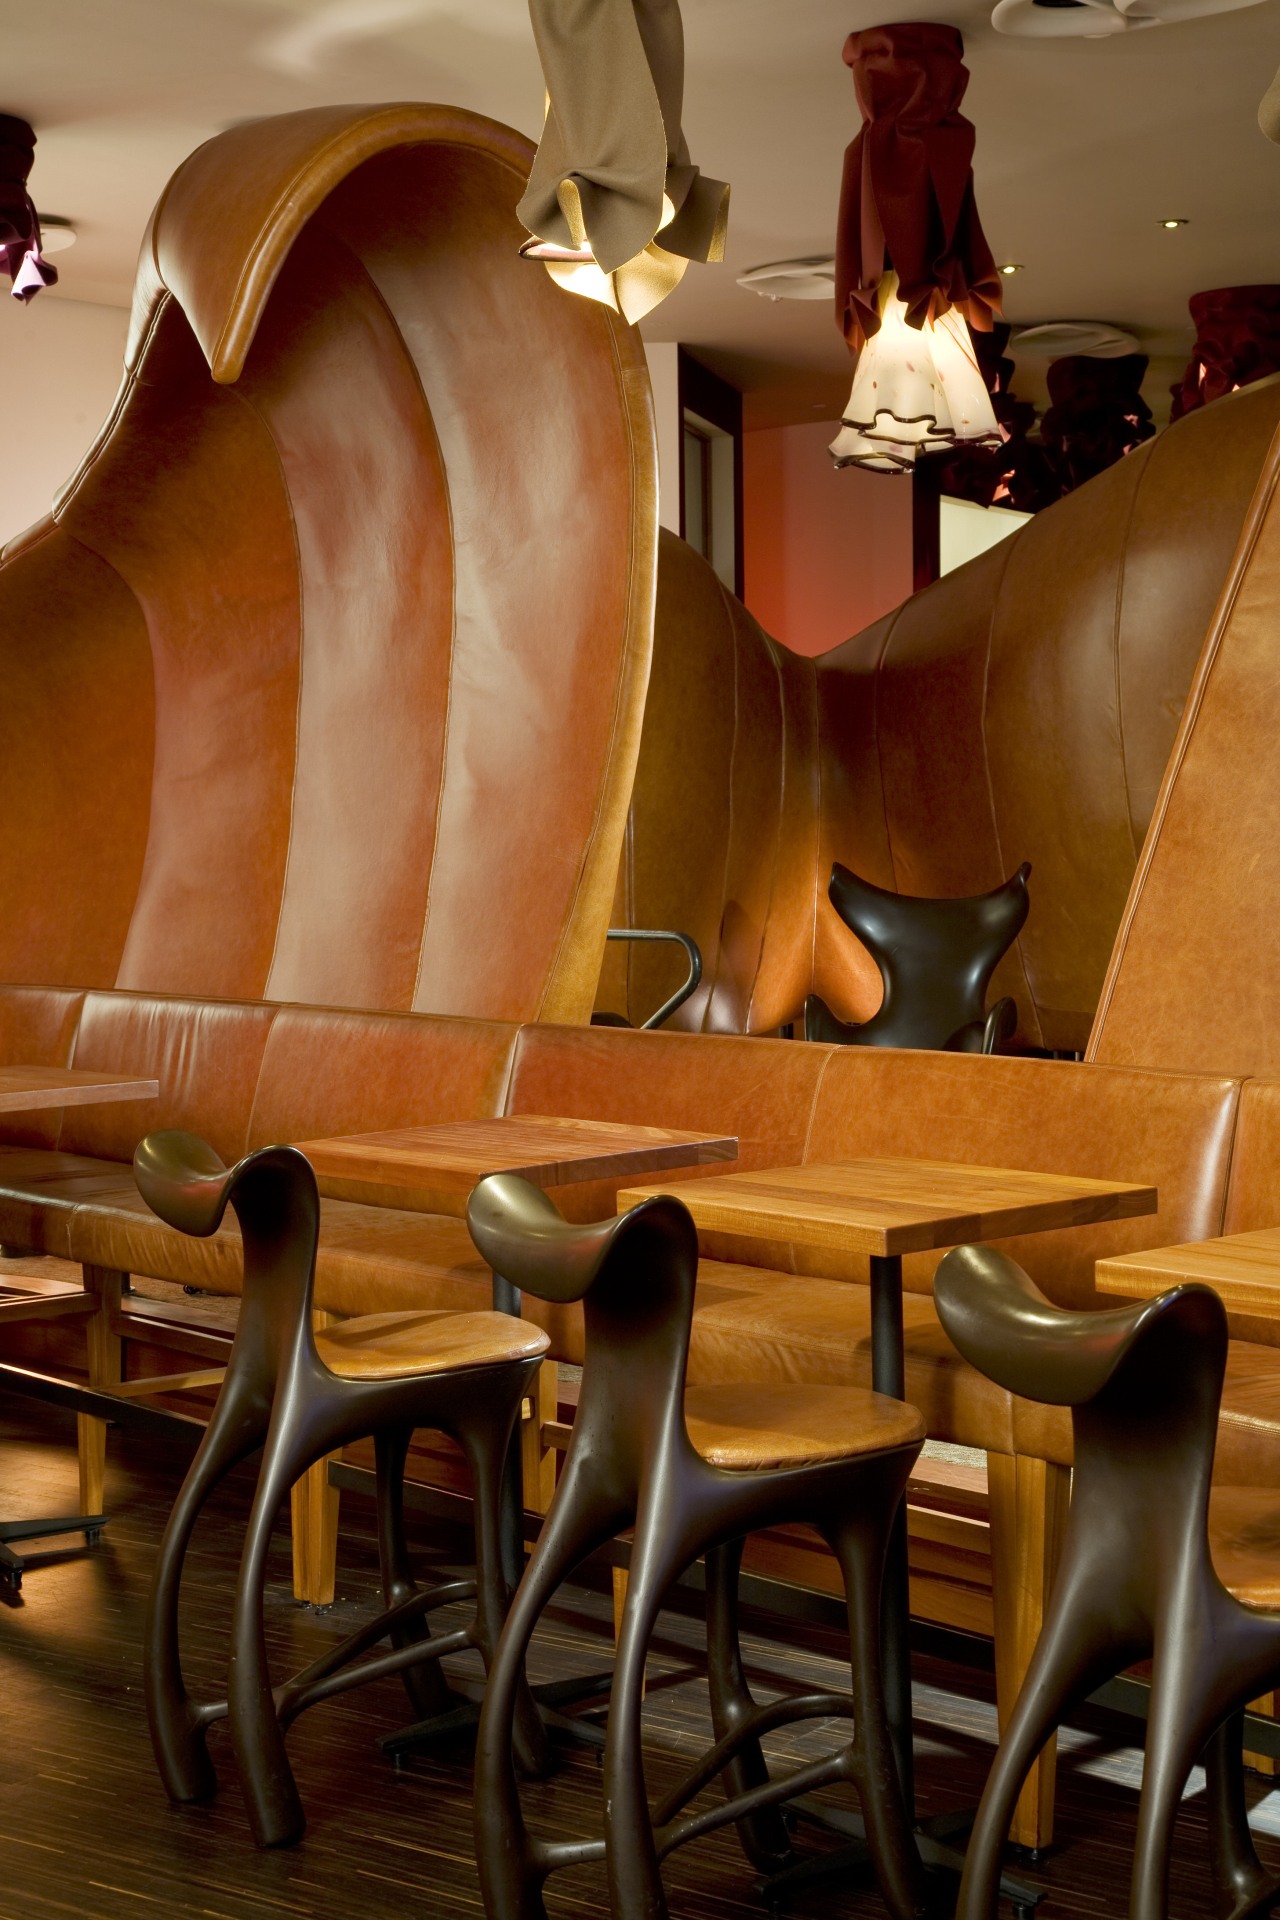 The lounge and dining areas in the Américas chair, flooring, furniture, interior design, restaurant, table, wood, brown